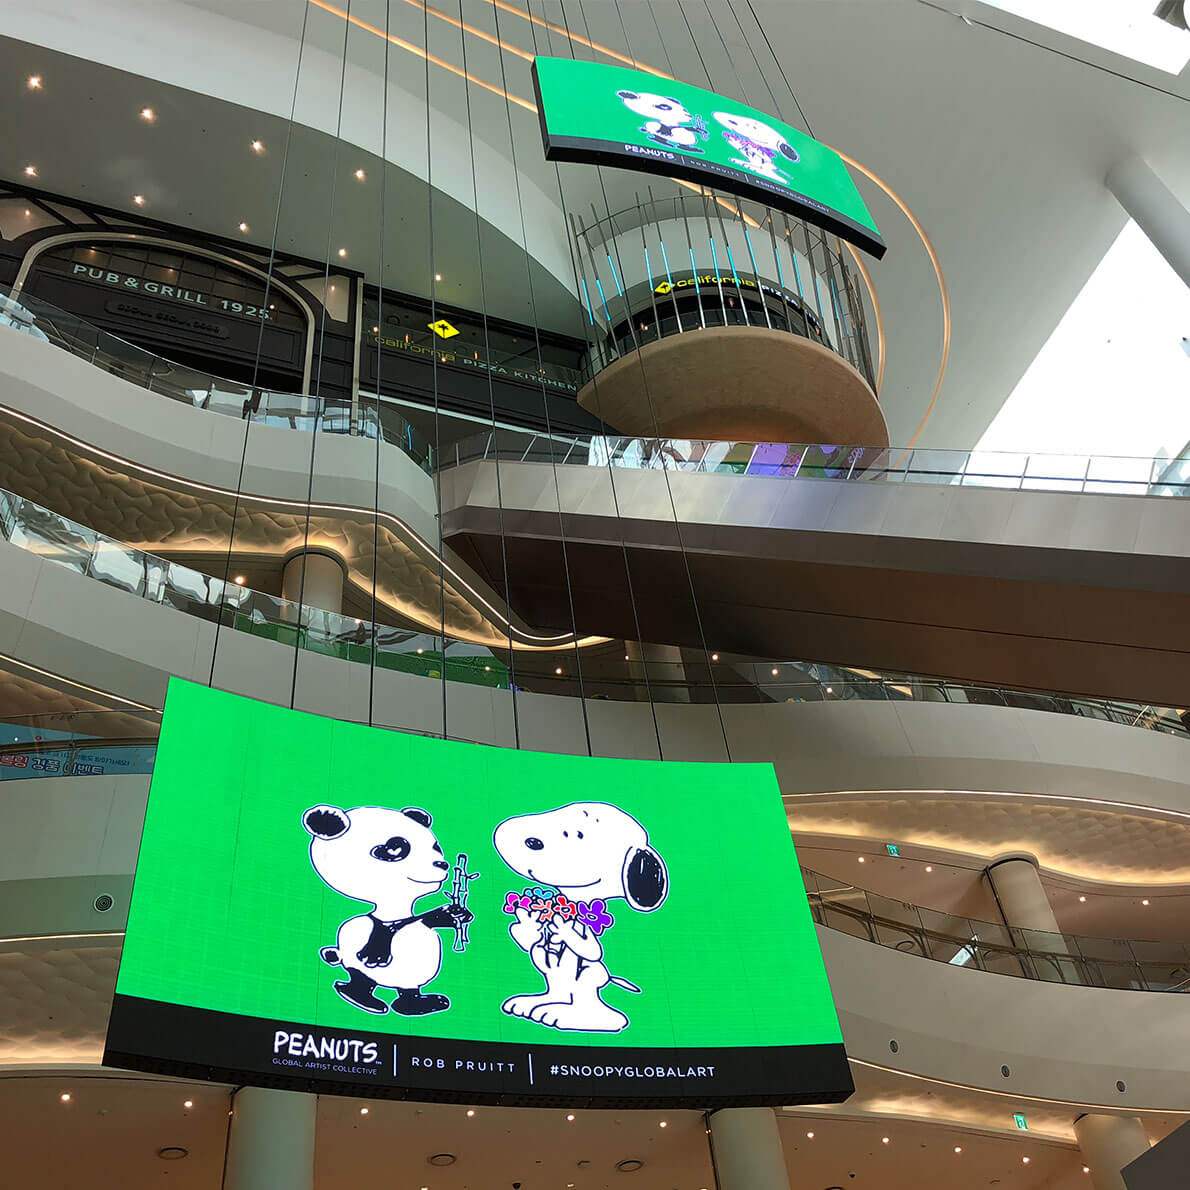 Two large LED screens hanging in a shopping mall.